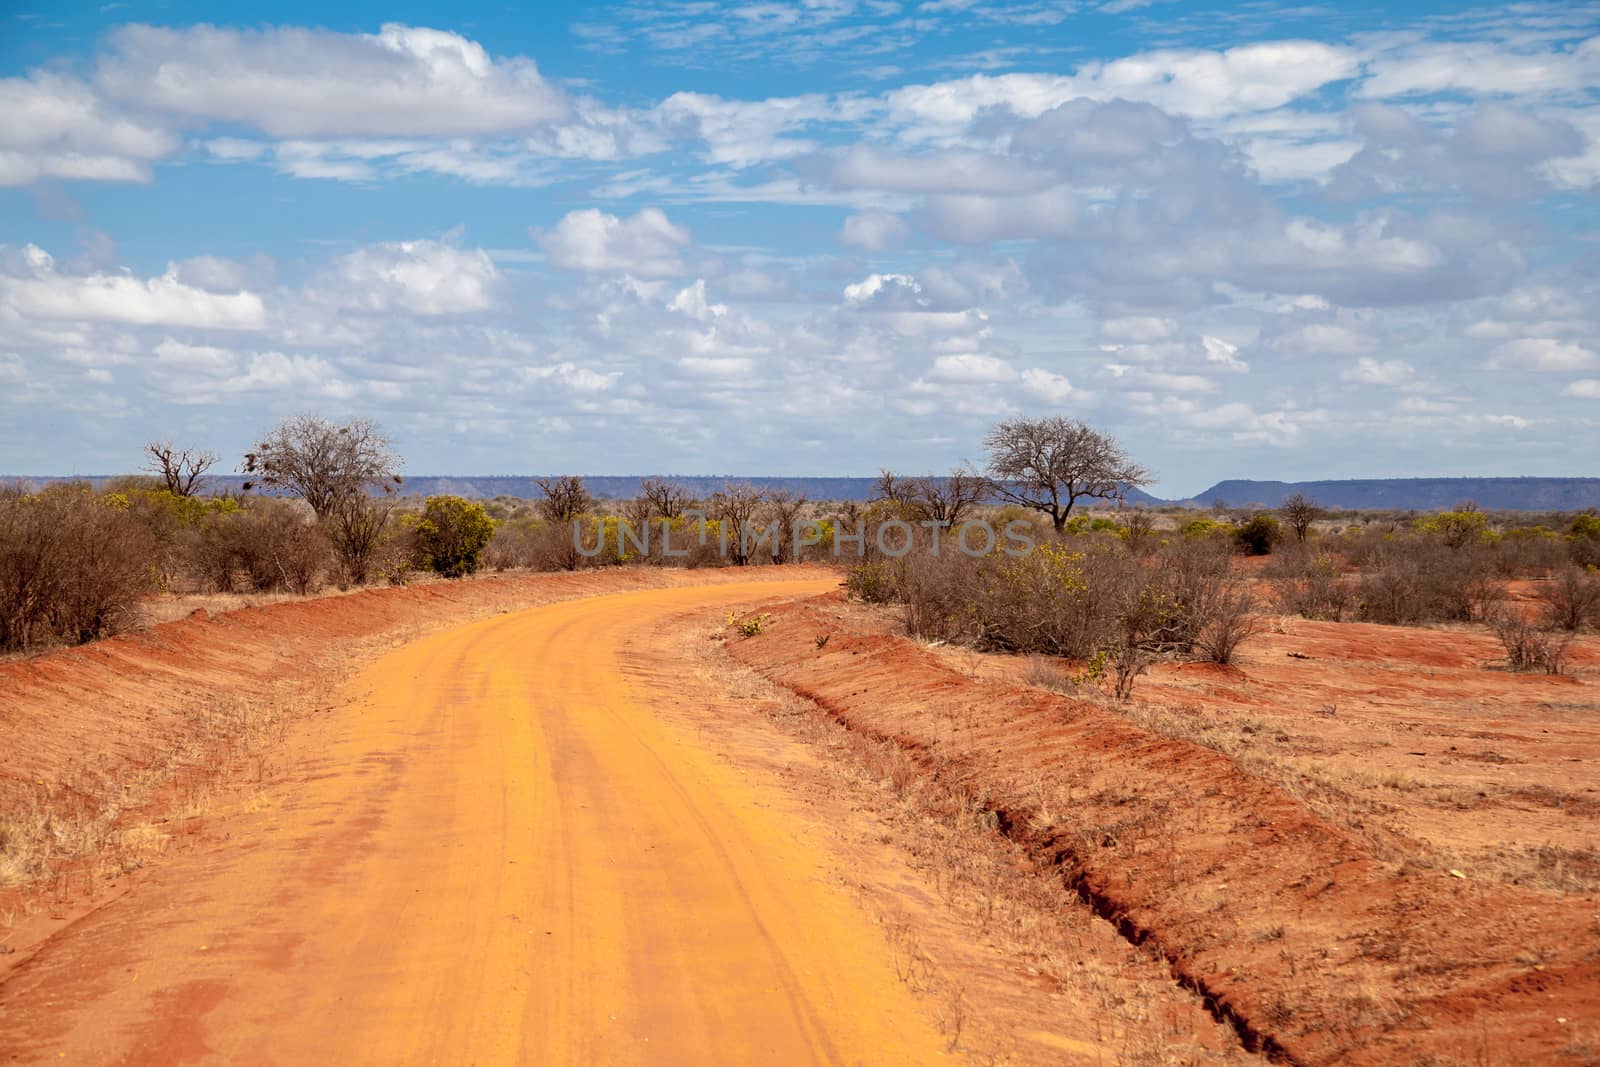 Road in Kenya, savannah with mountains and blue sky and trees by 25ehaag6